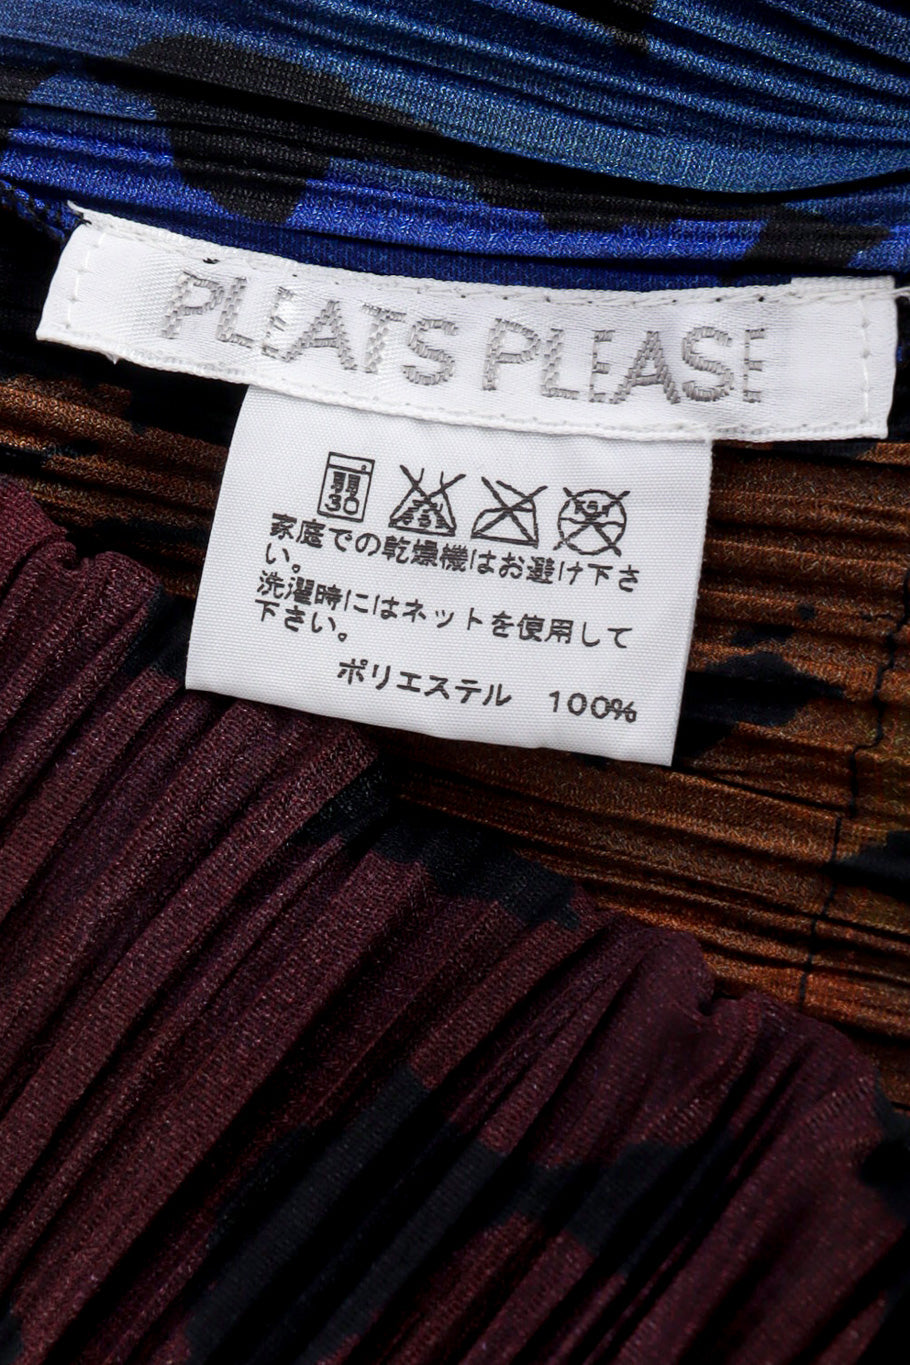 Pleated tank top from Pleats Please by Issey Miyake label @recessla